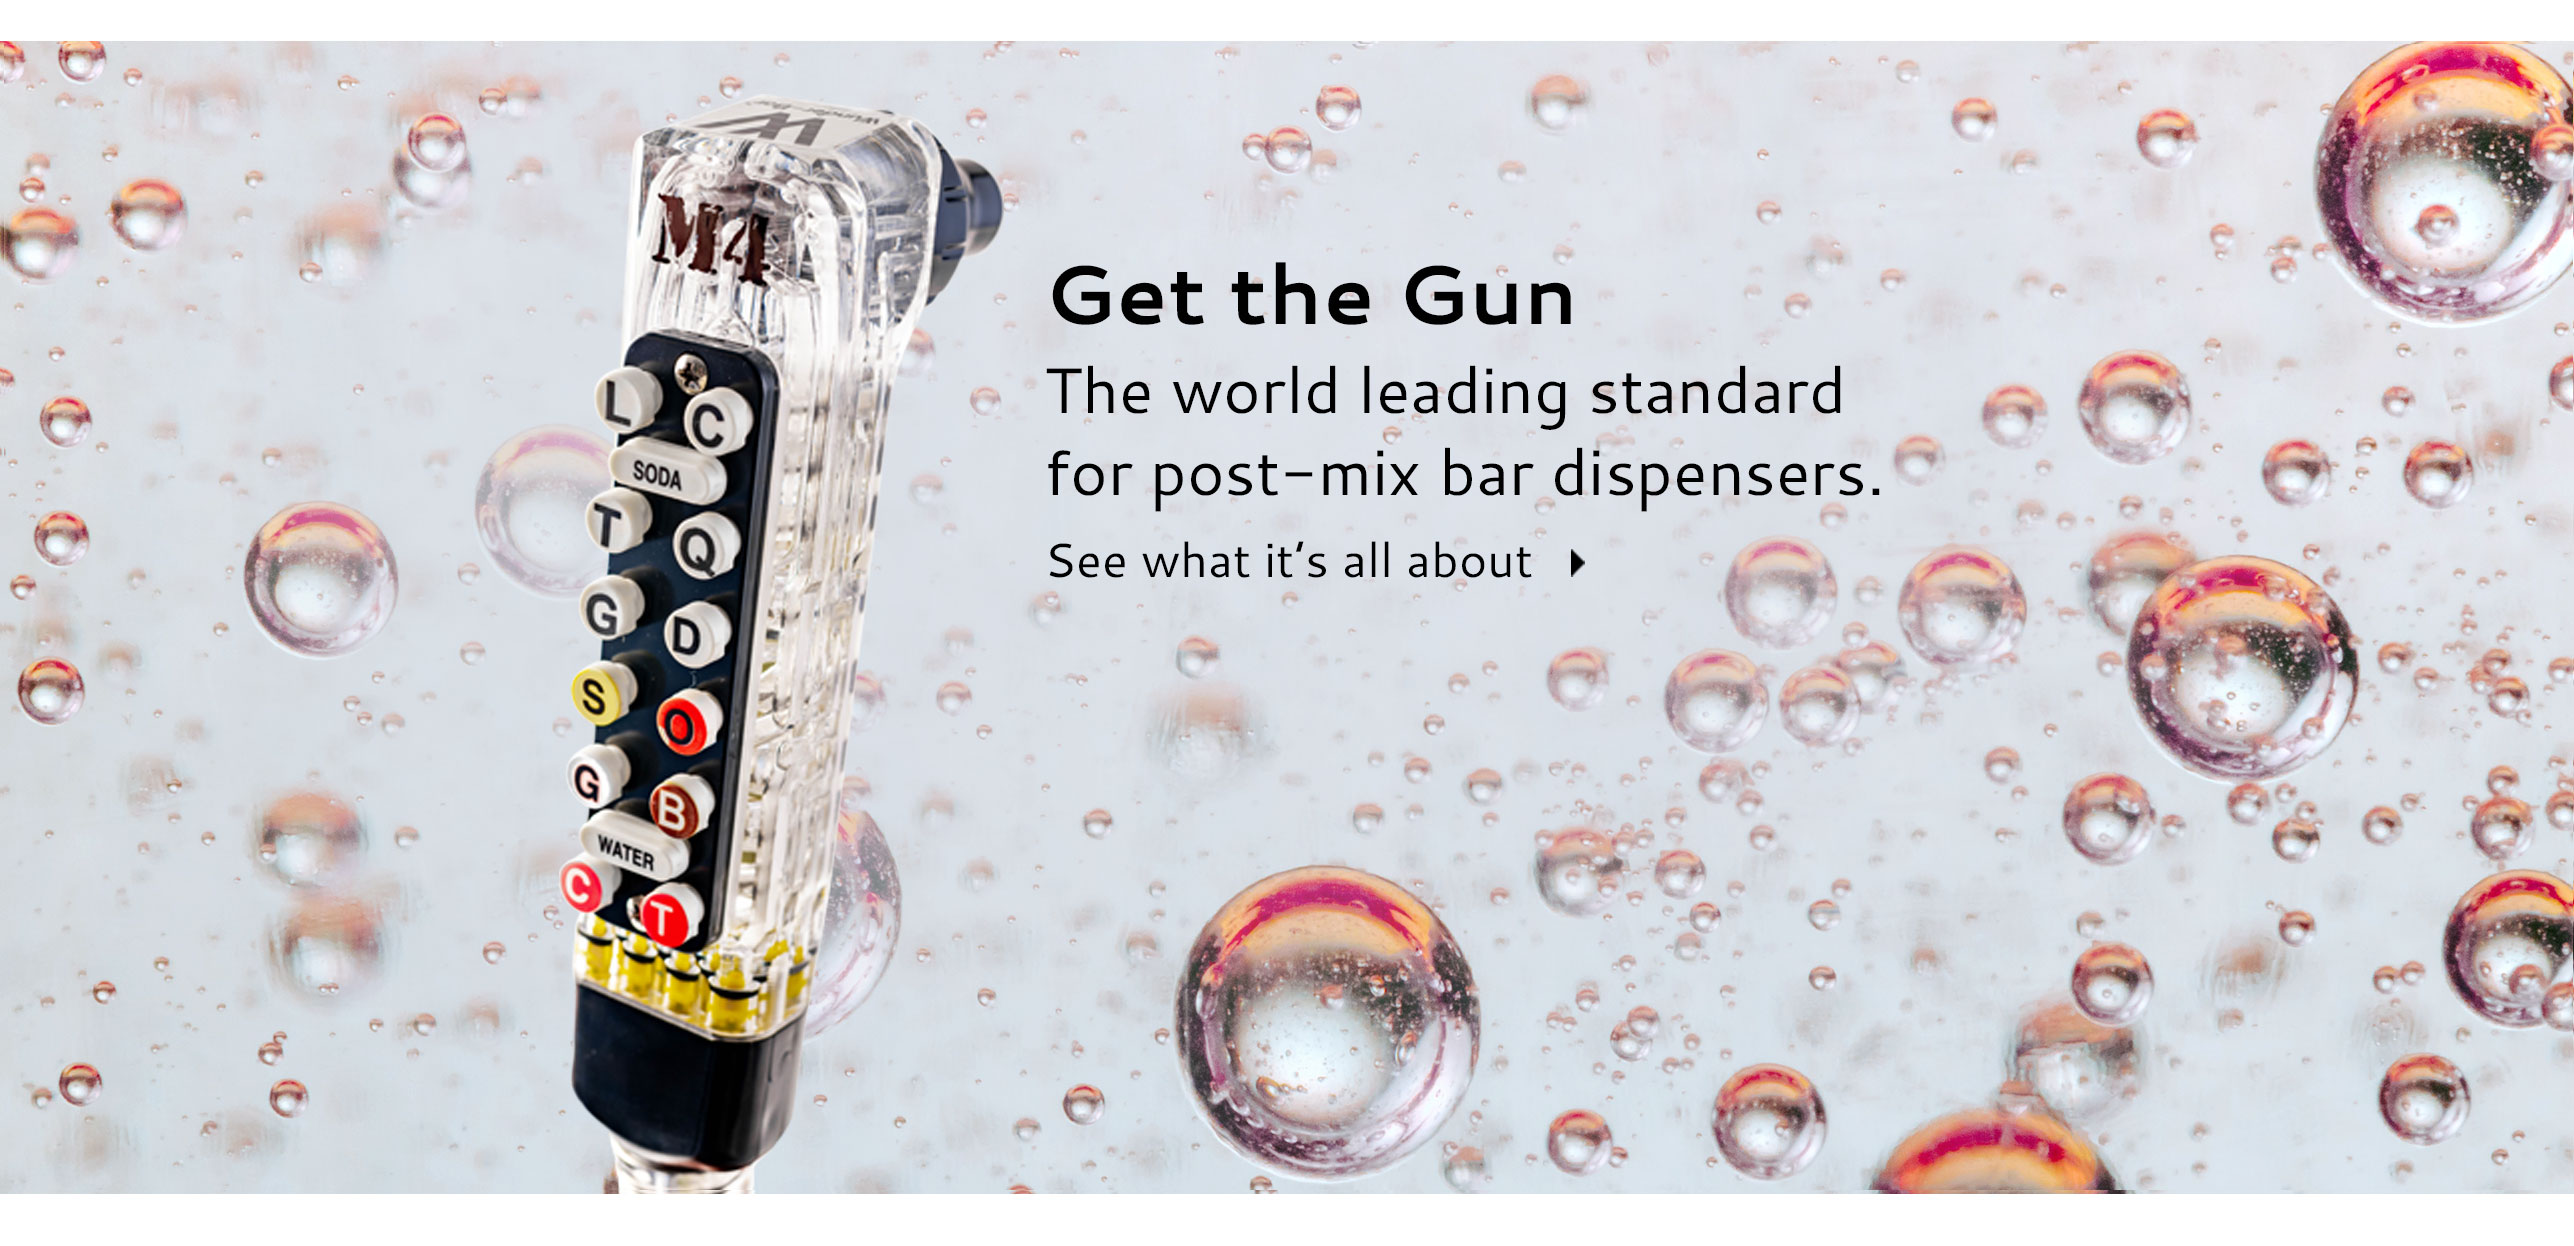 M4 Bargun
The world leading standard for post-mix bar dispensers.